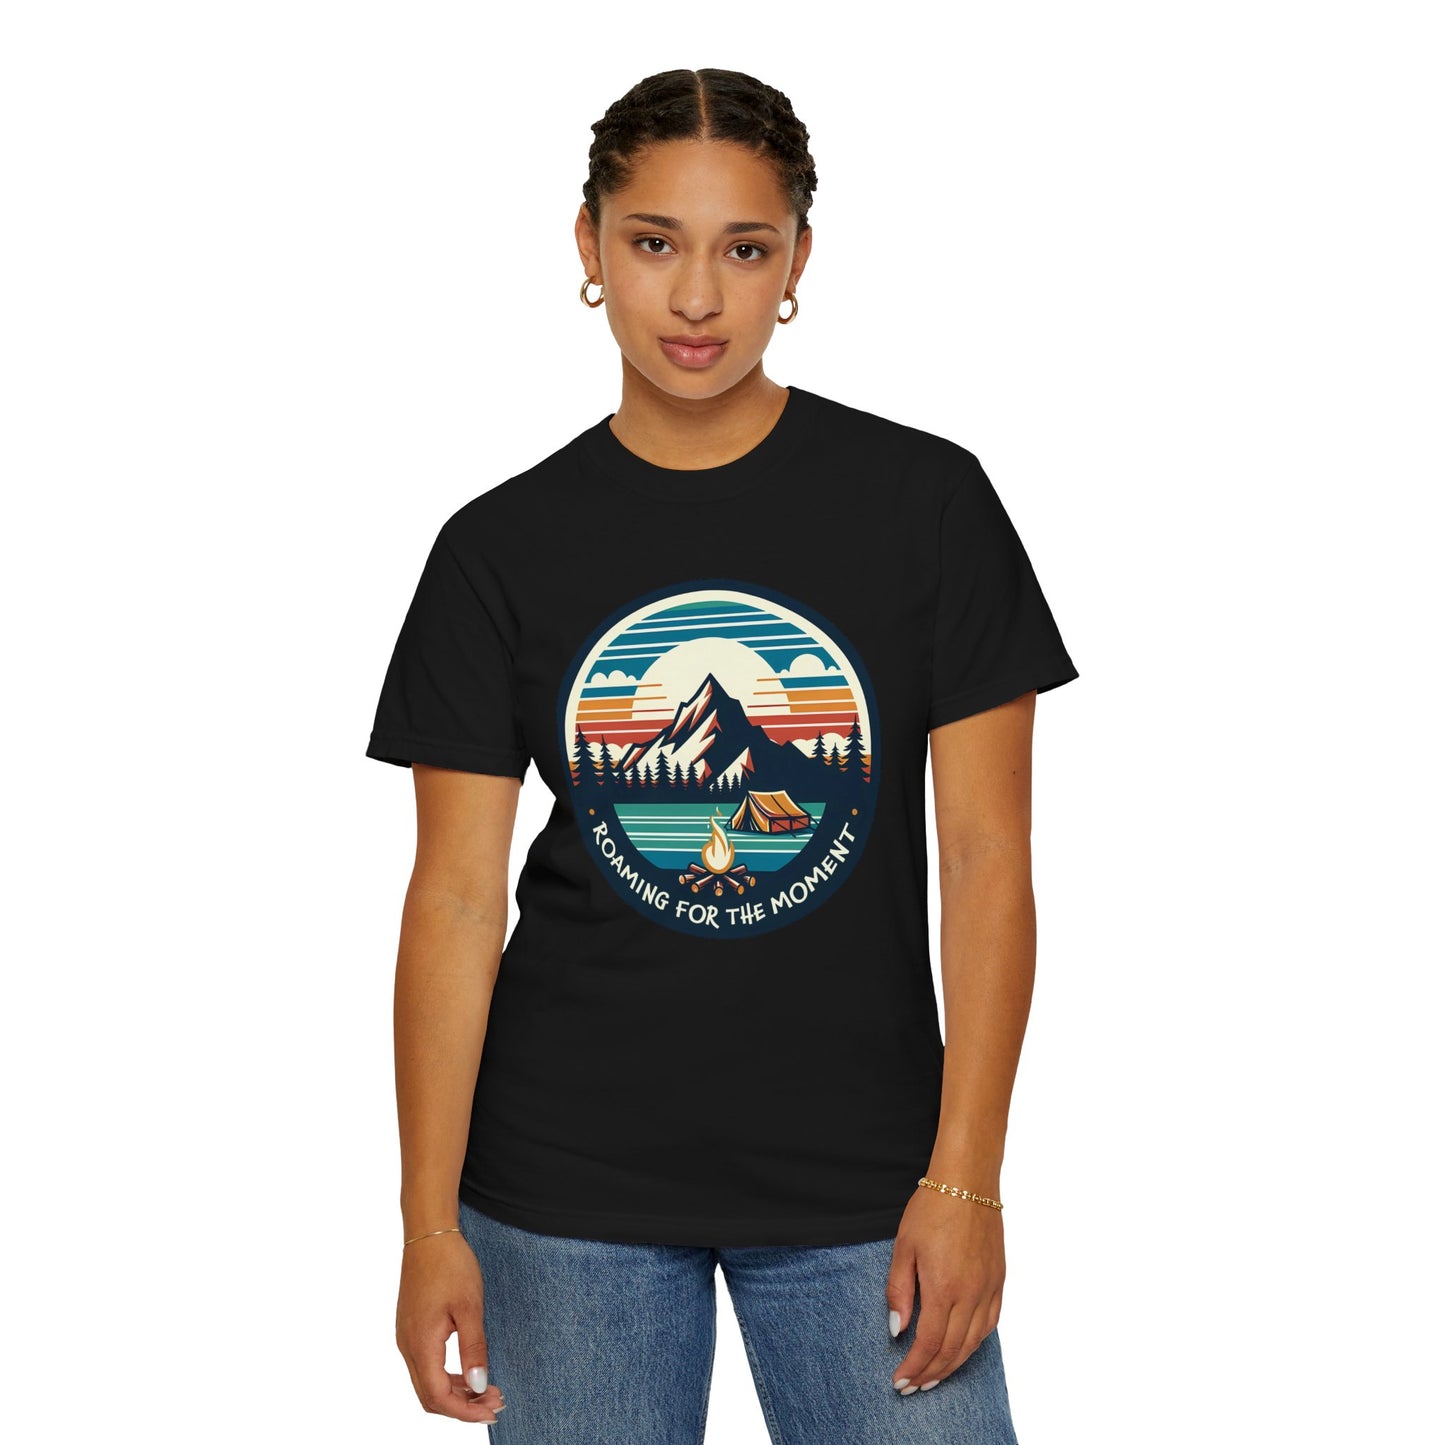 Camping Roaming Garment Dyed T-Shirt, Outdoor Adventures Tee, Retro Campfire TShirt, Gift for Camper Nature Wilderness Lovers